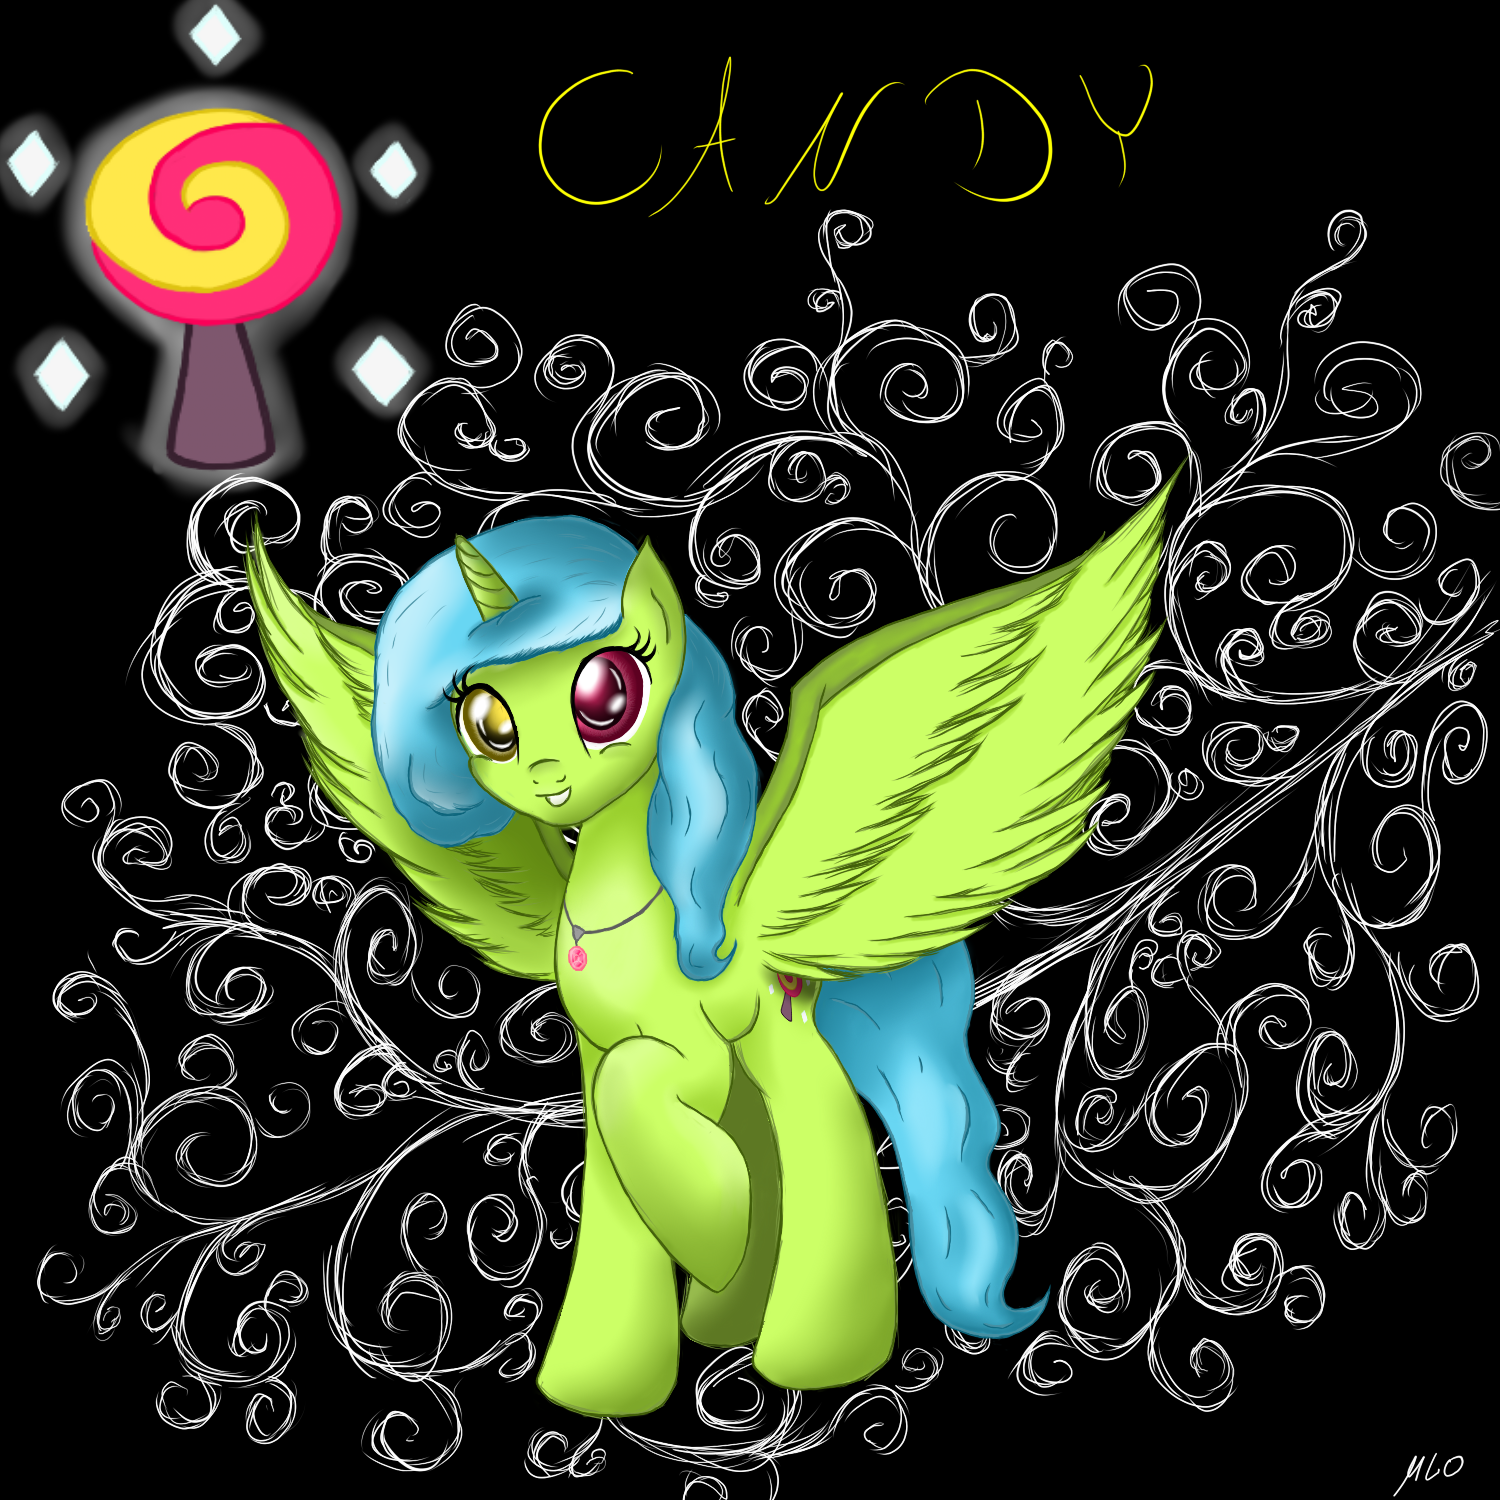 oc_candy_by_mlopl-d5wu29j.png